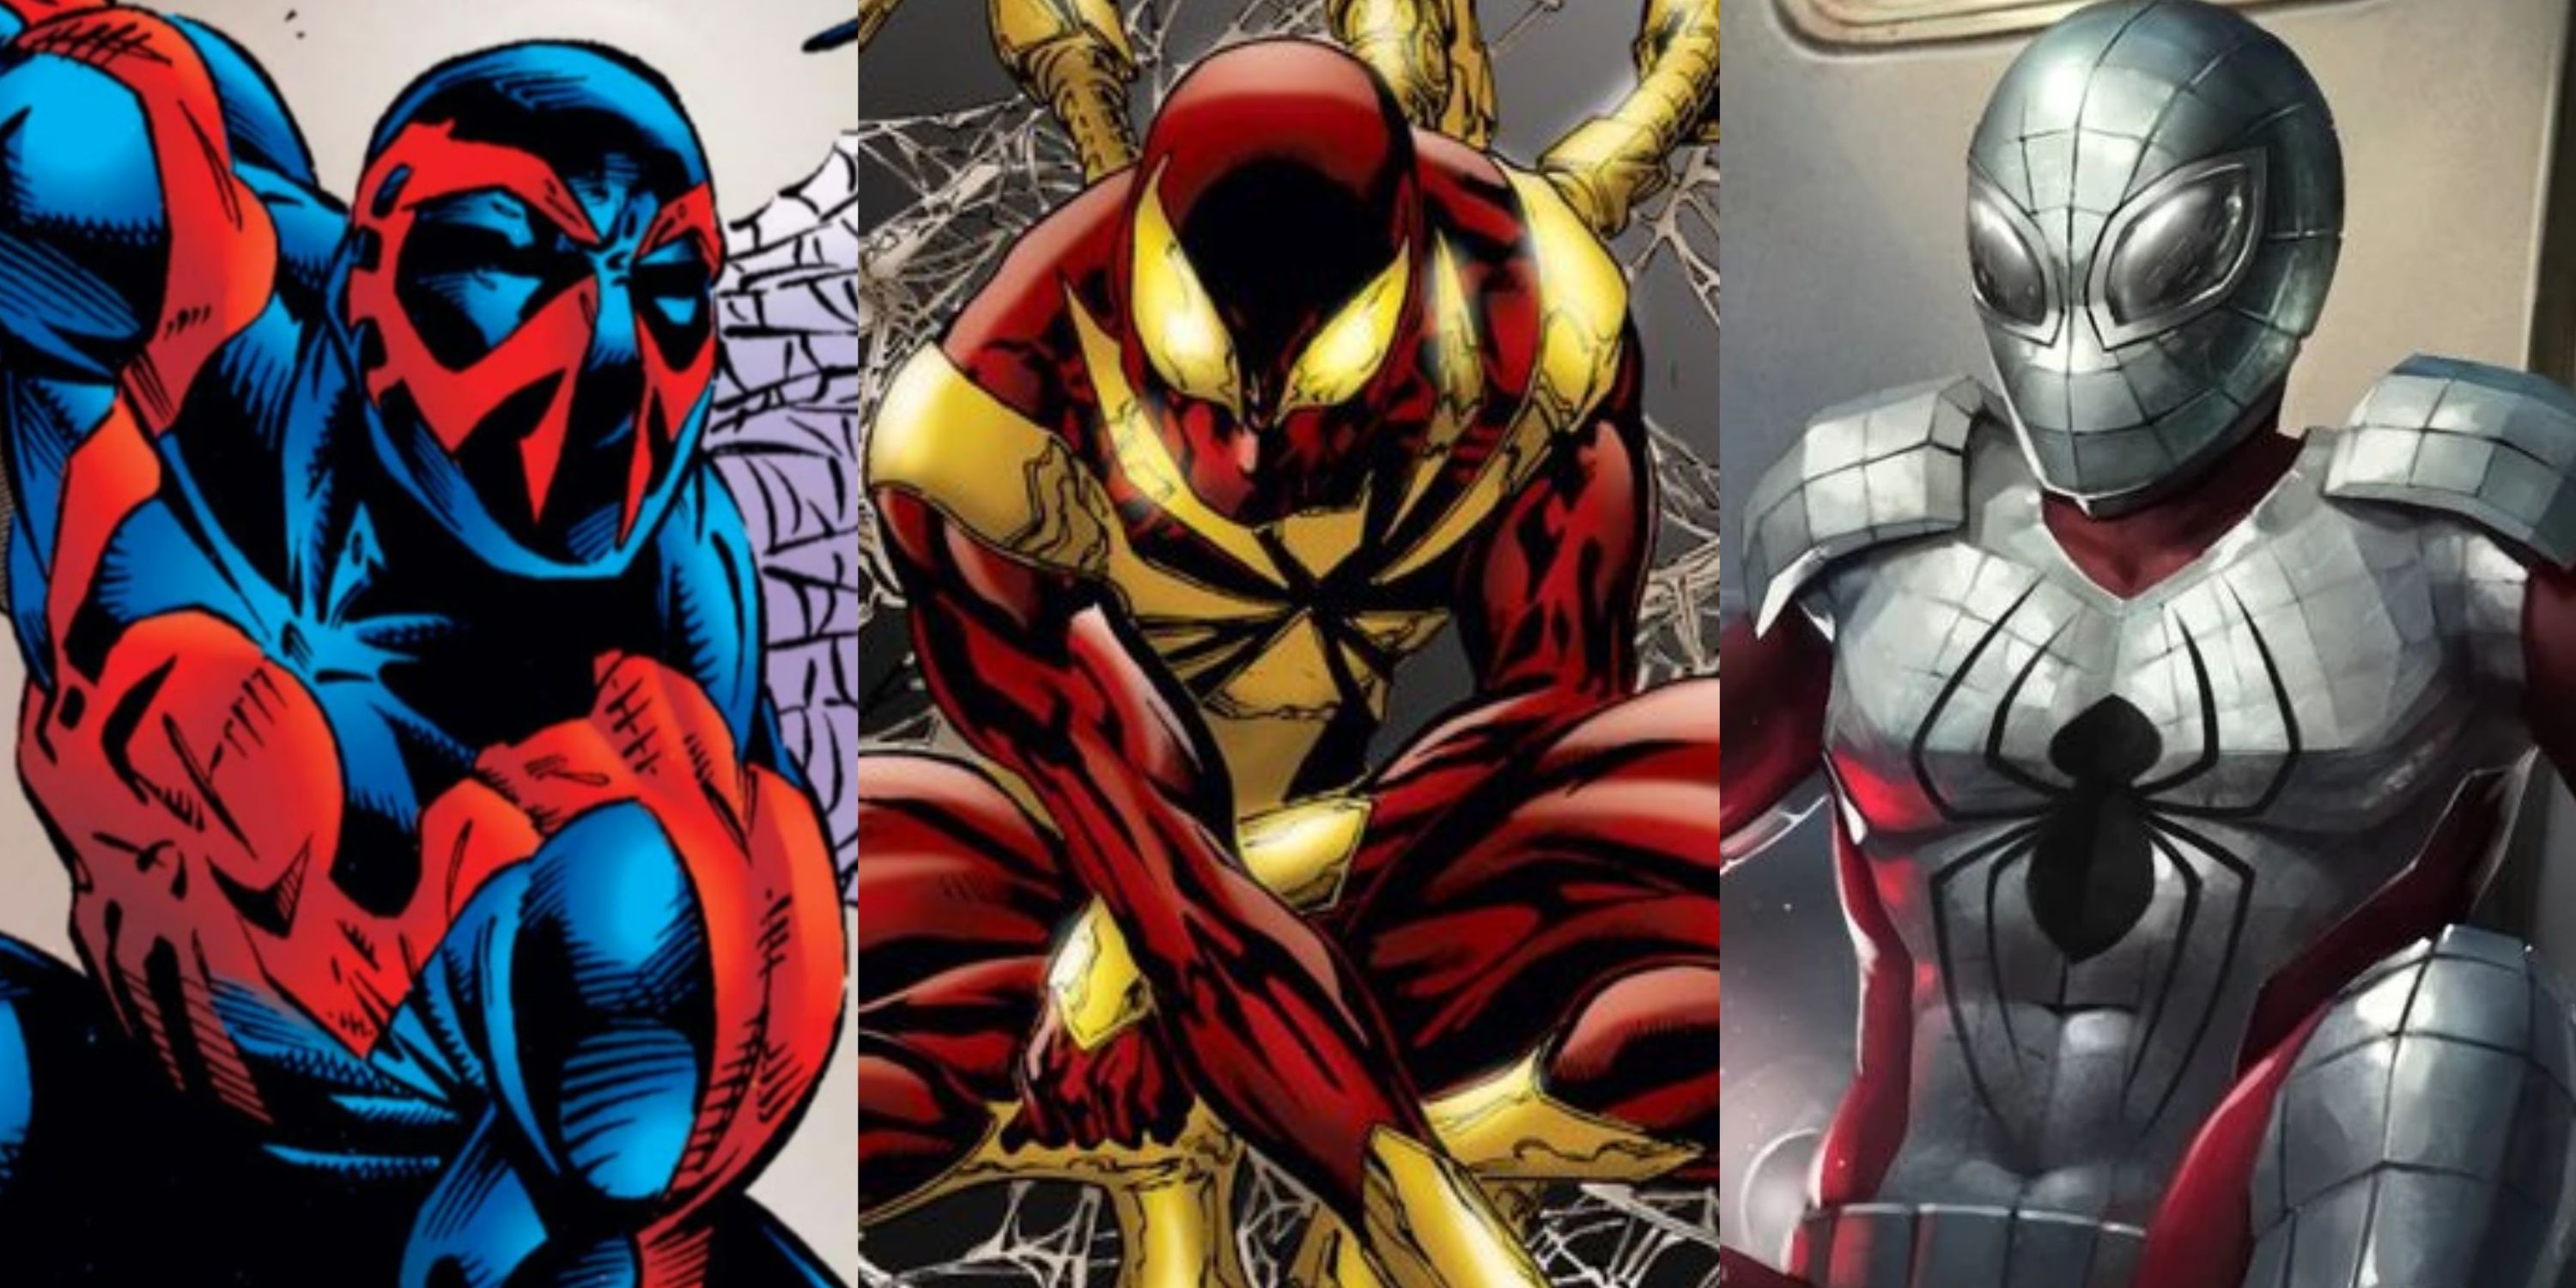 Split image of Spider-Man 2099, Civil War comic Iron Spider and the silver and black Spider-Armor